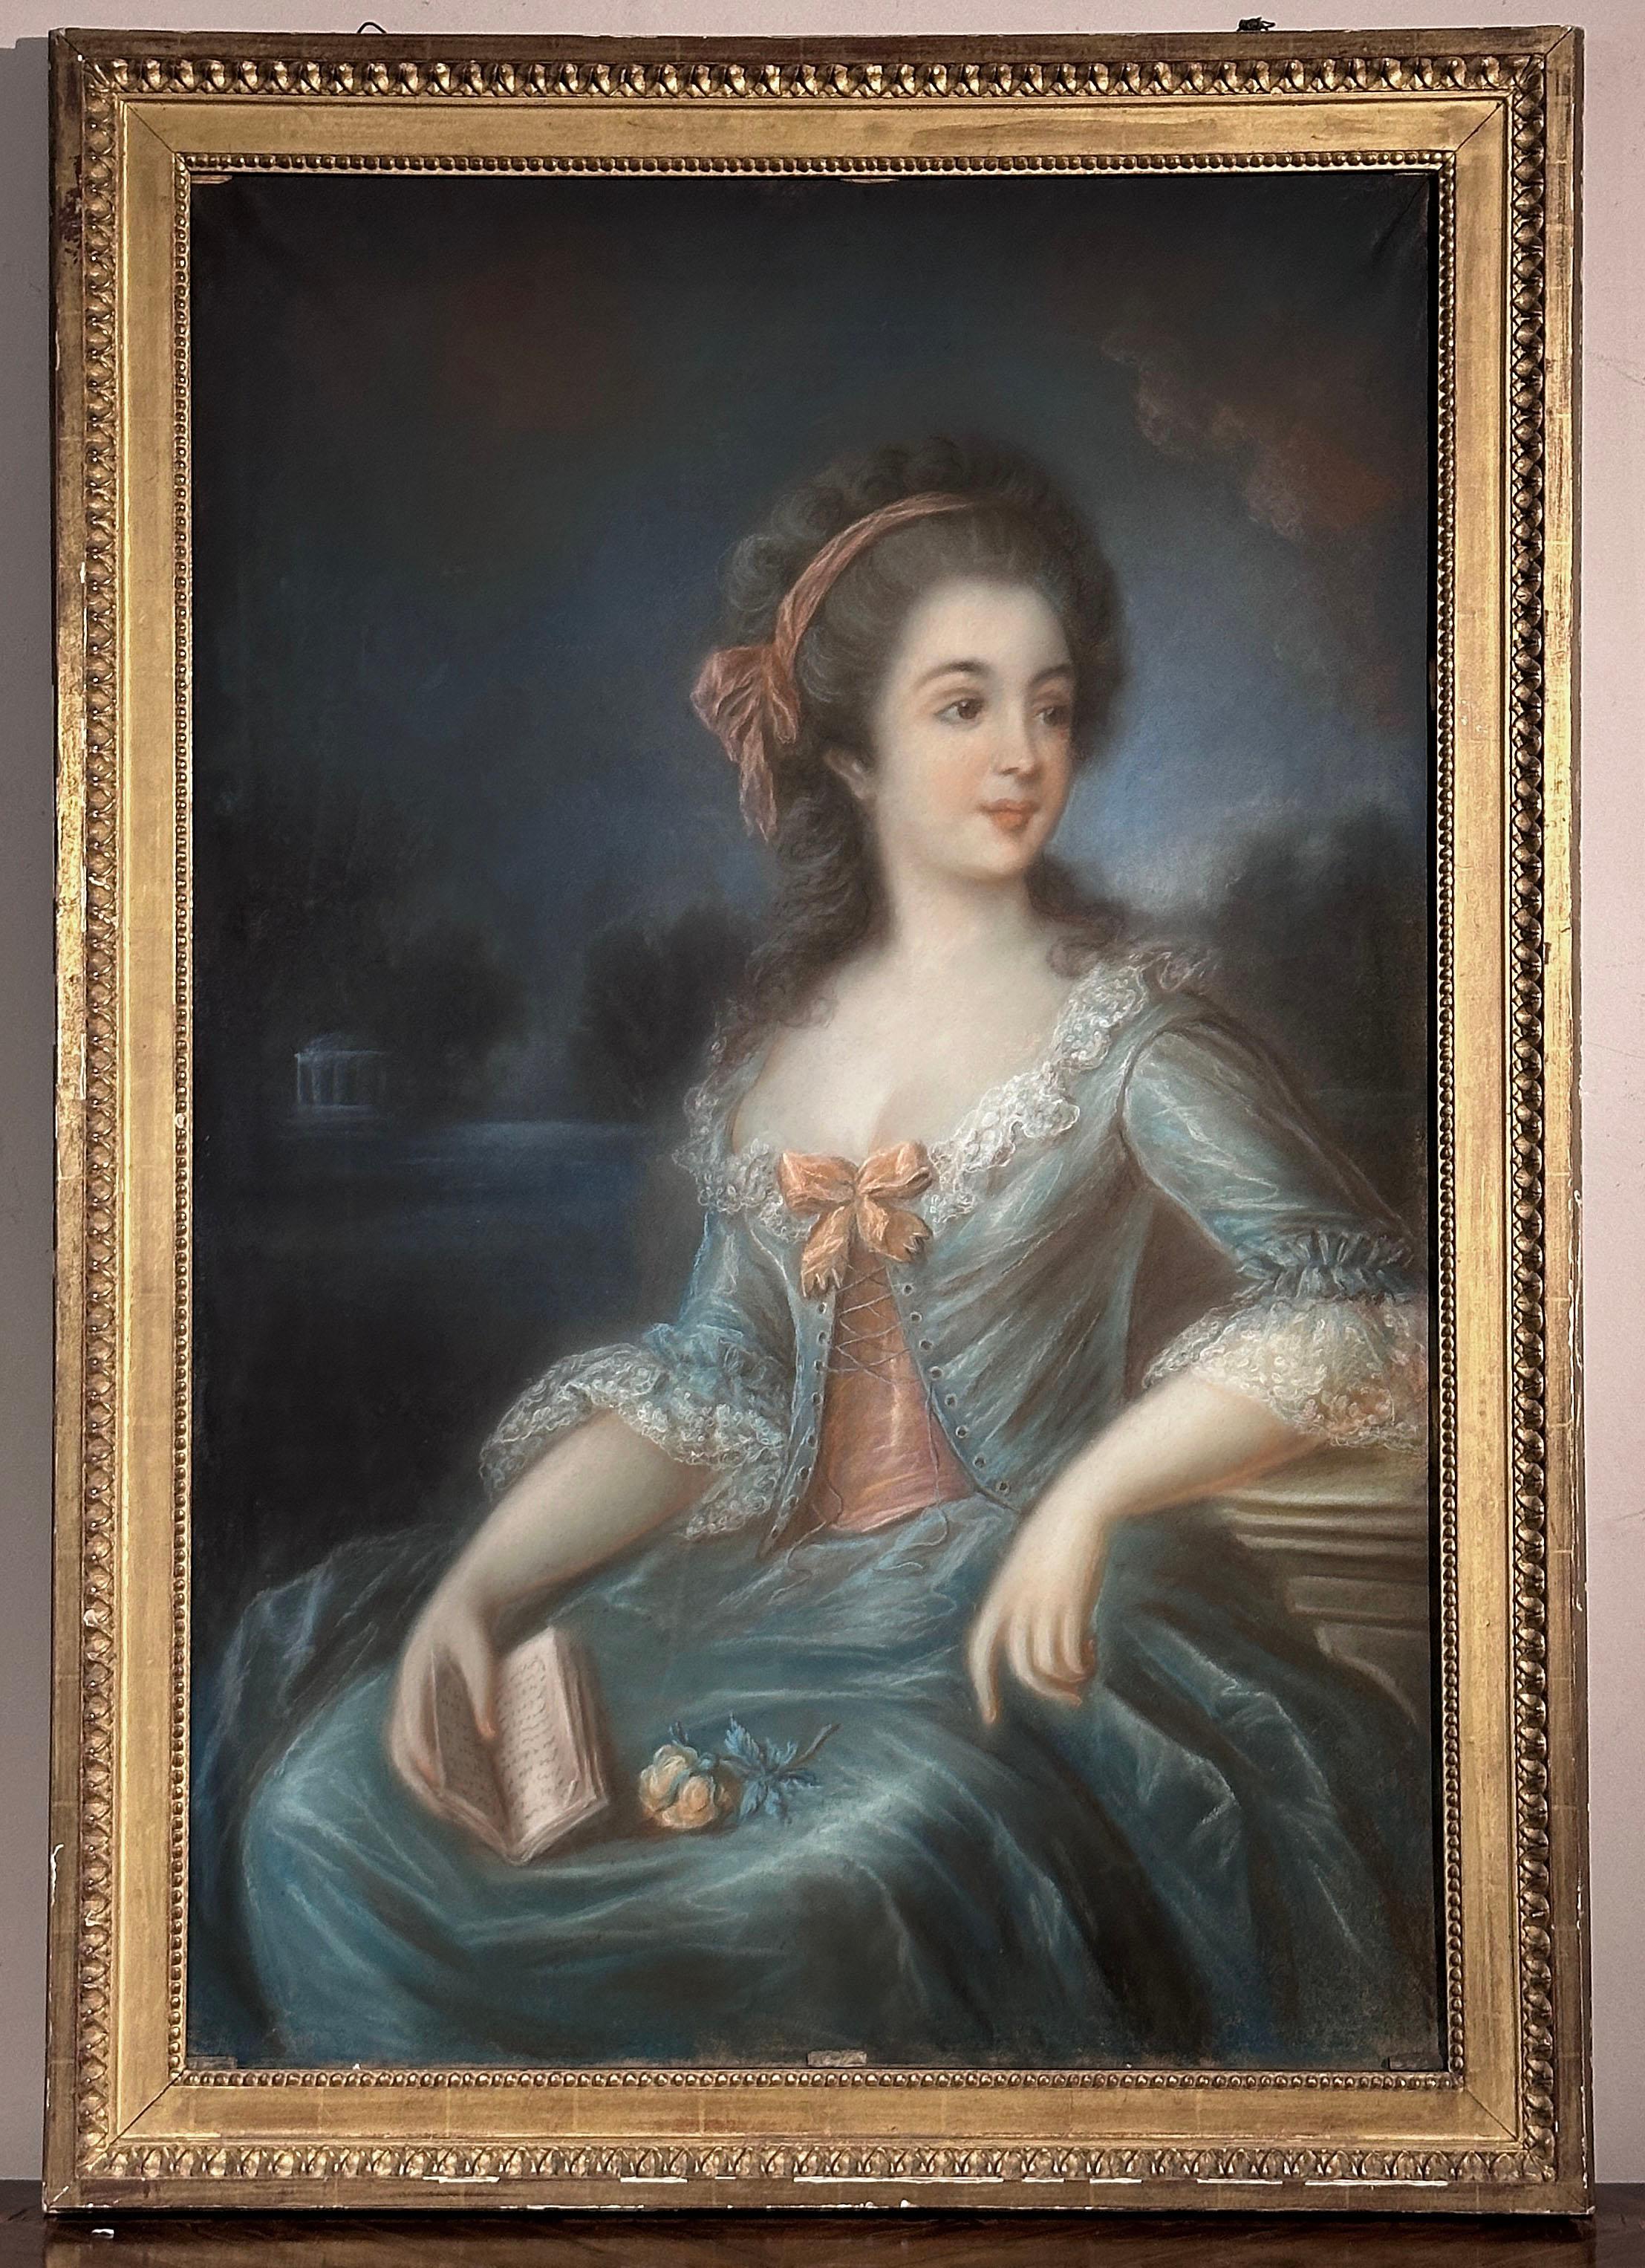 Splendid pastel portrait on paper, mounted on a canvas board and framed in an antique pine wood frame carved and gilded with gold leaf. The glass covering the painting is also an authentic period piece, being hand blown. At the center of the